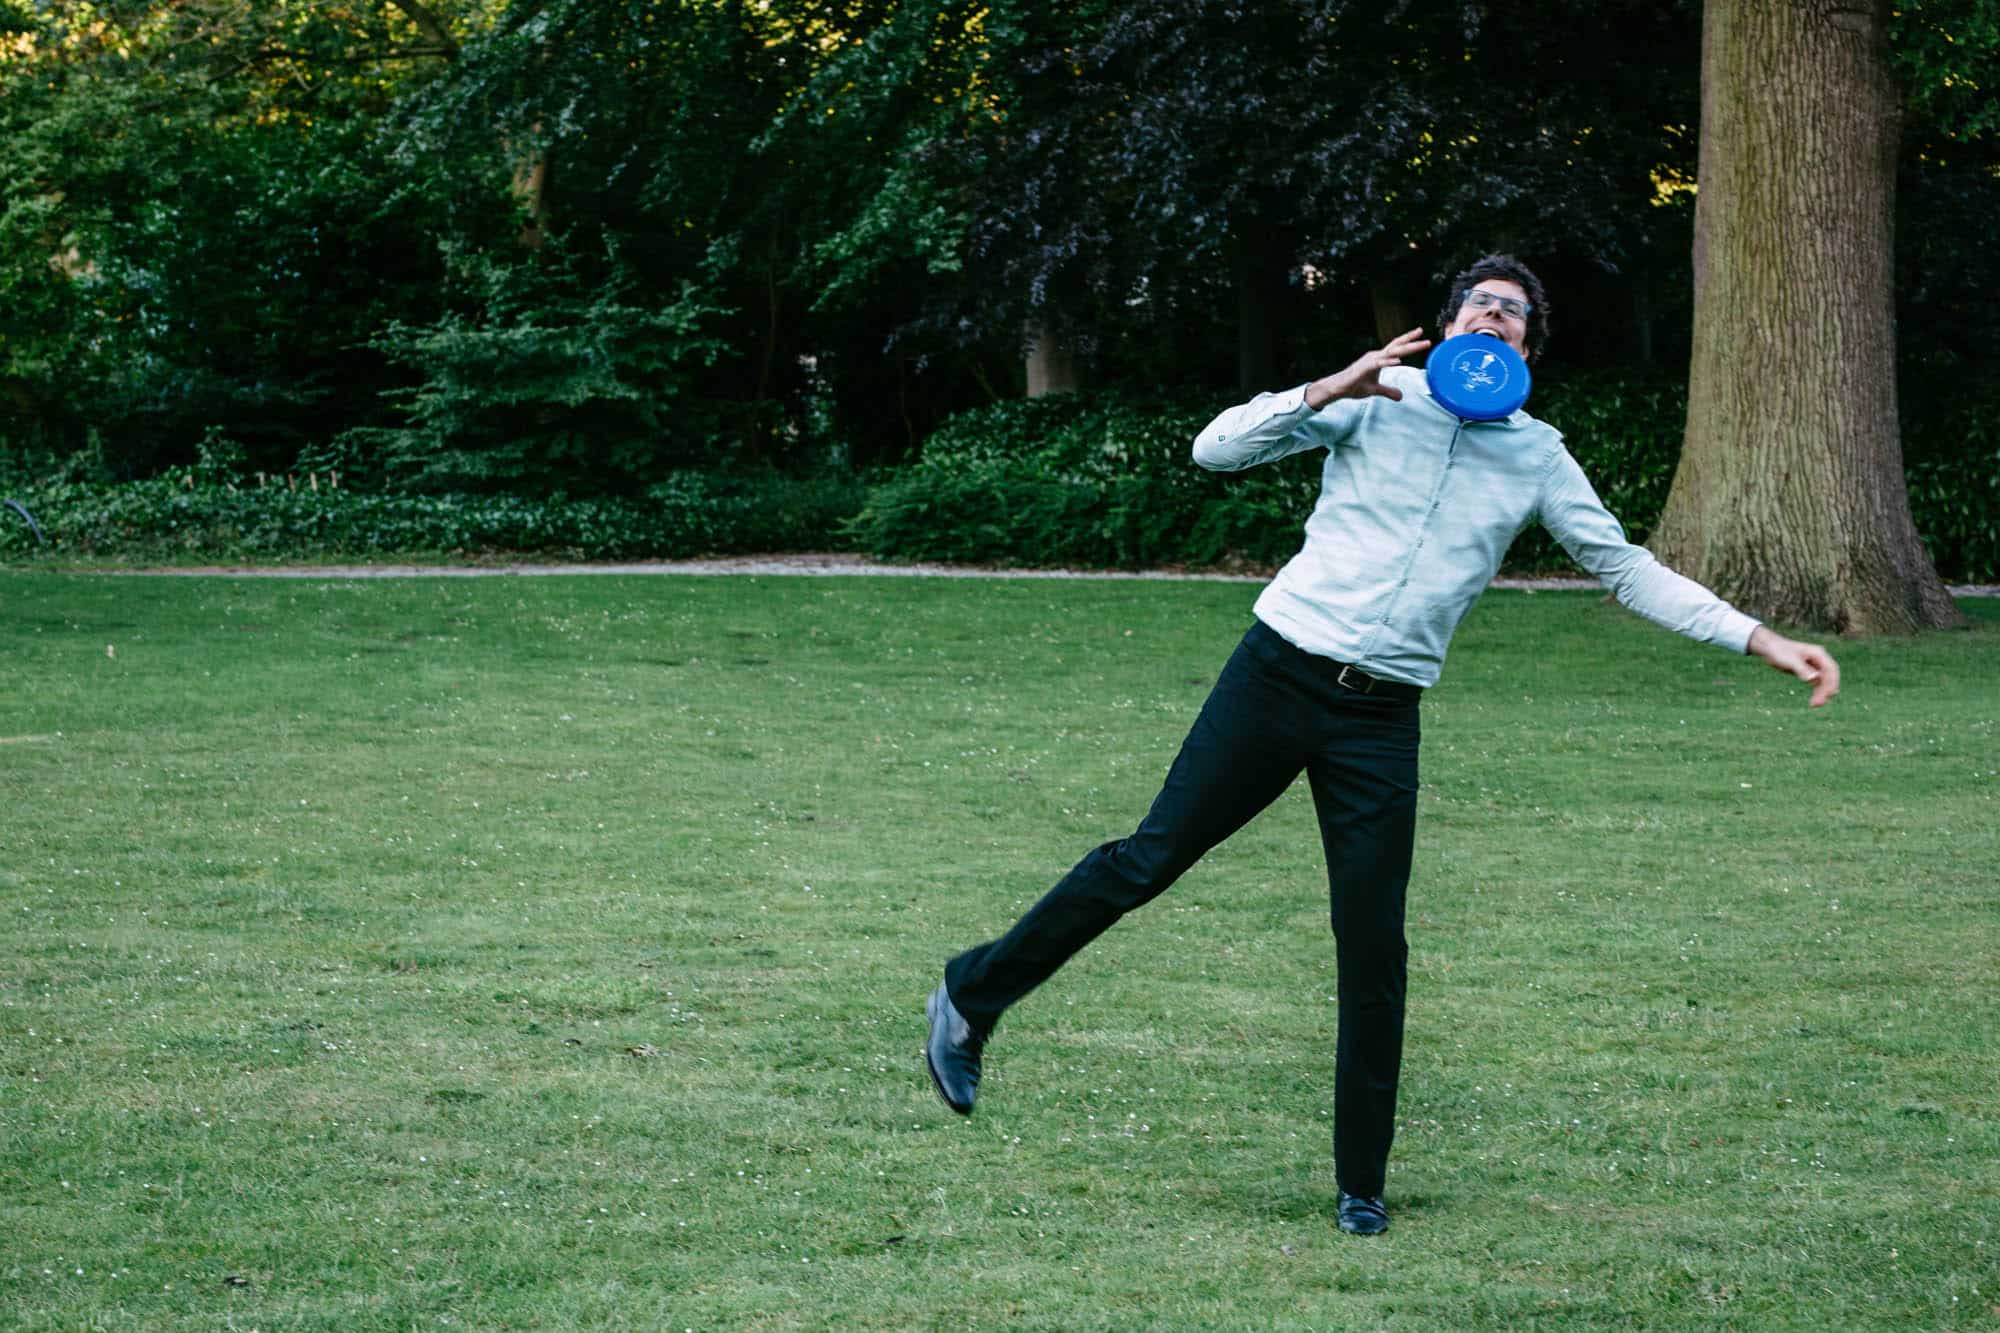 A man plays with a frisbee in a park.